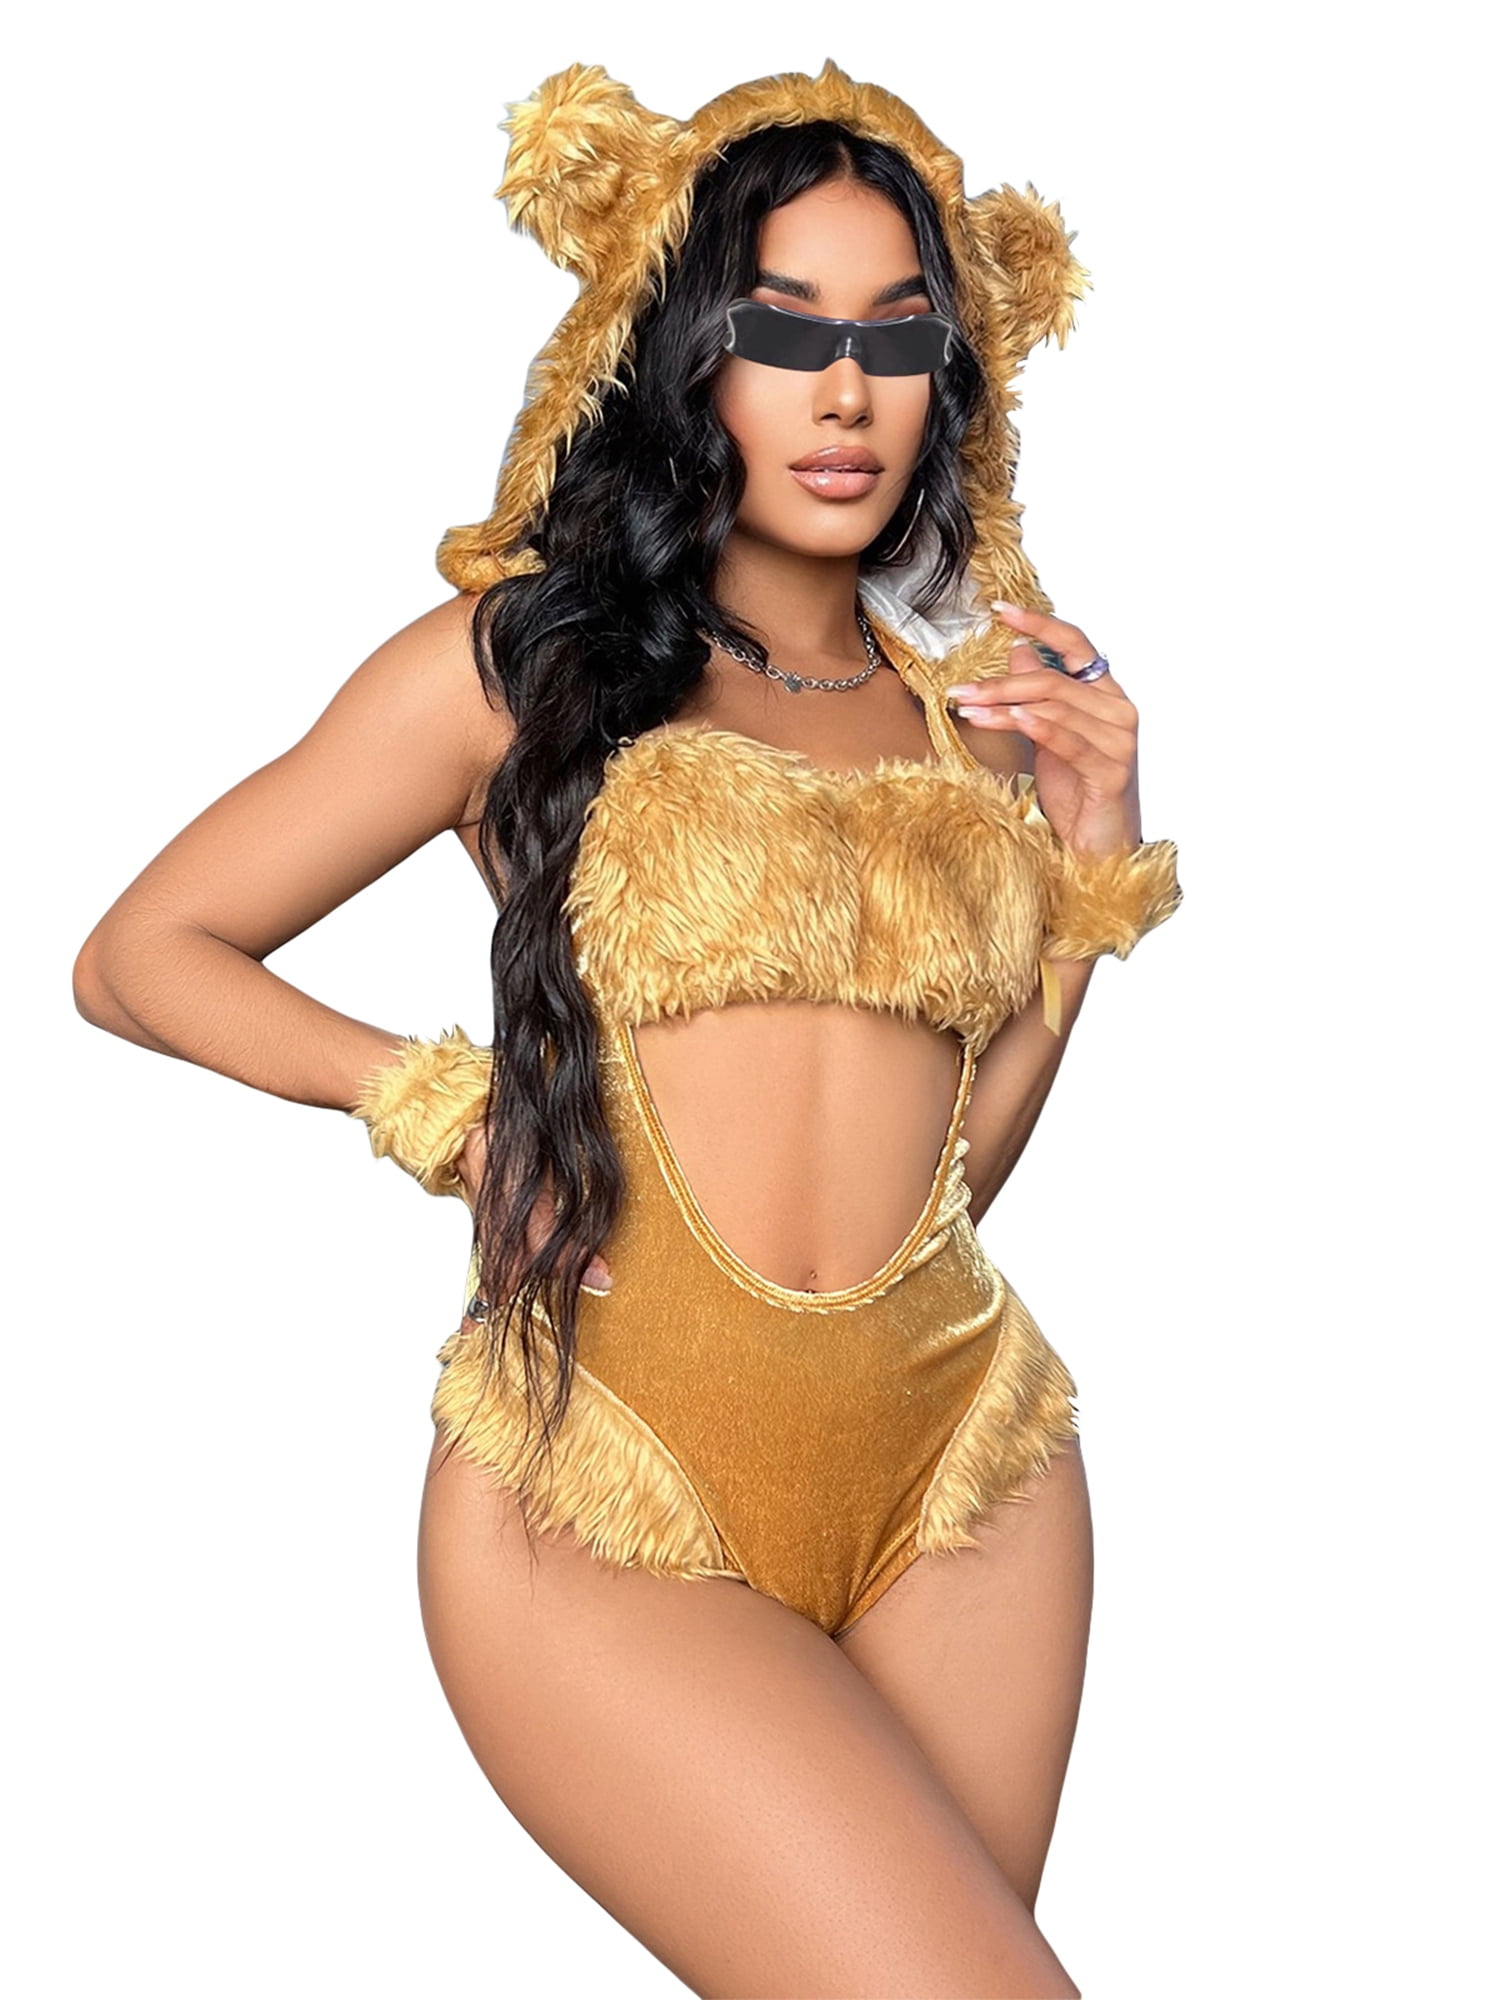 Women Sexy Lingerie Cat Hooded Bodysuit Chest Cutout Long Sleeve One-piece  Bodysuit with Tail